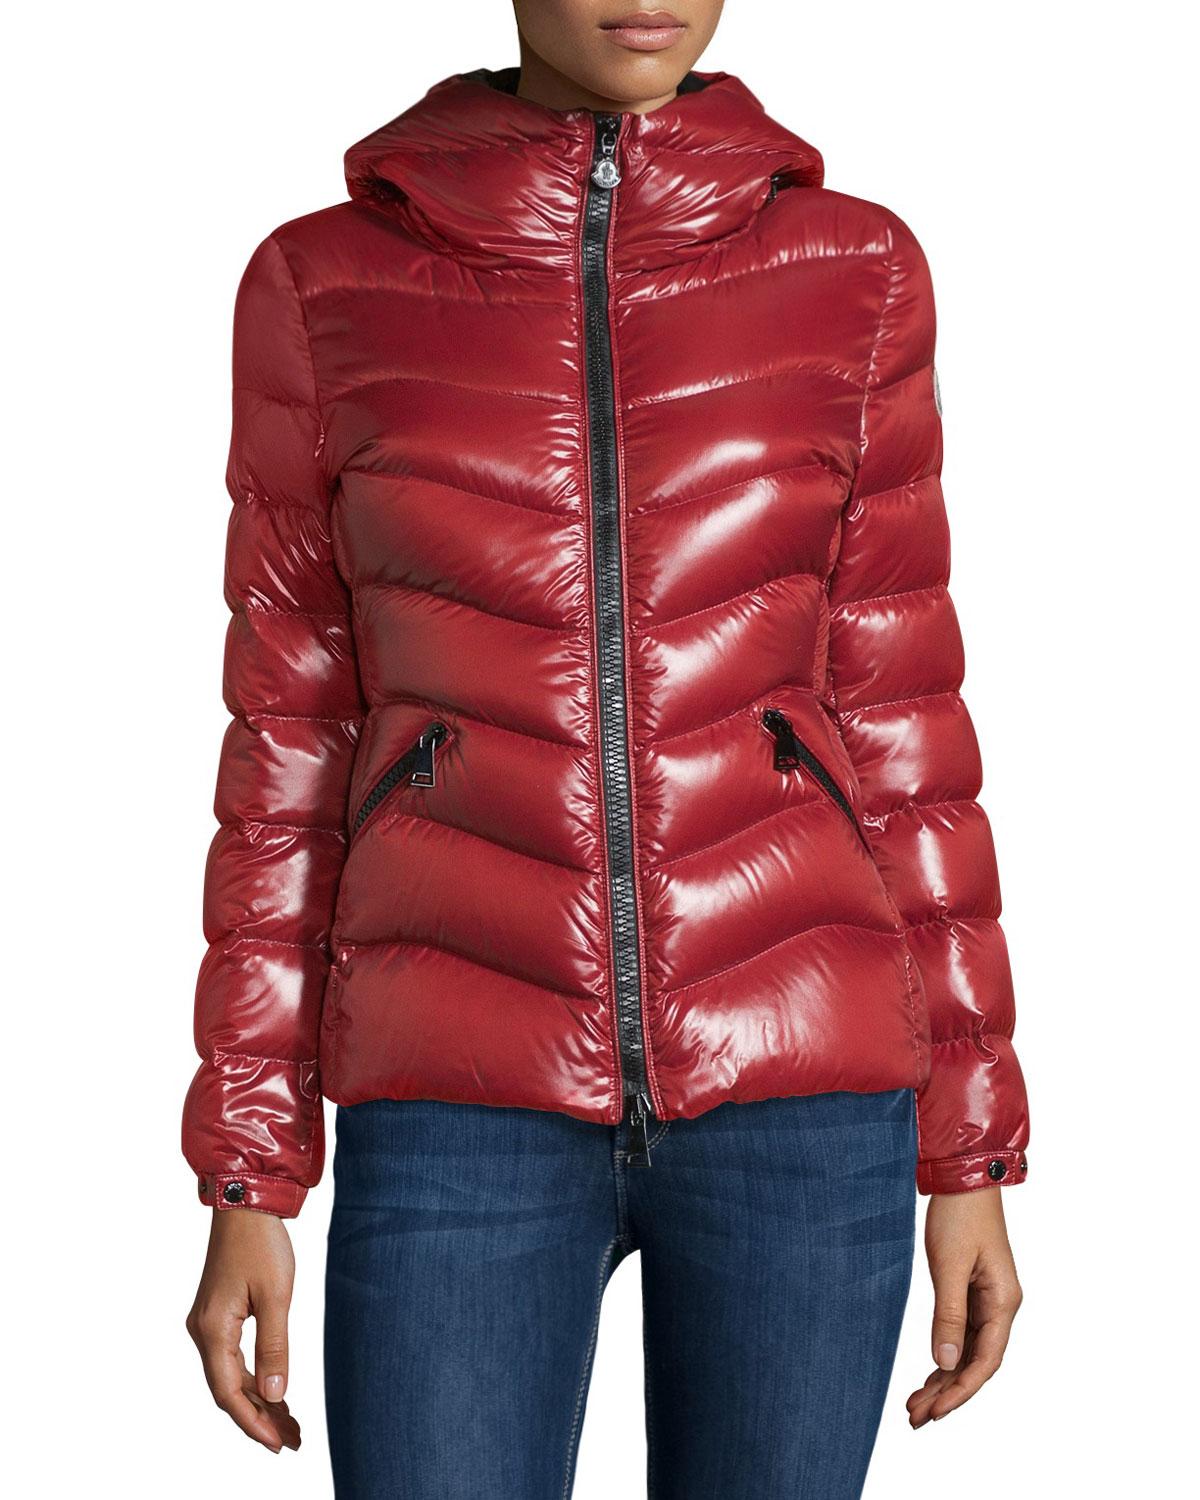 Lyst - Moncler Anthia Hooded Wave Puffer Jacket in Black